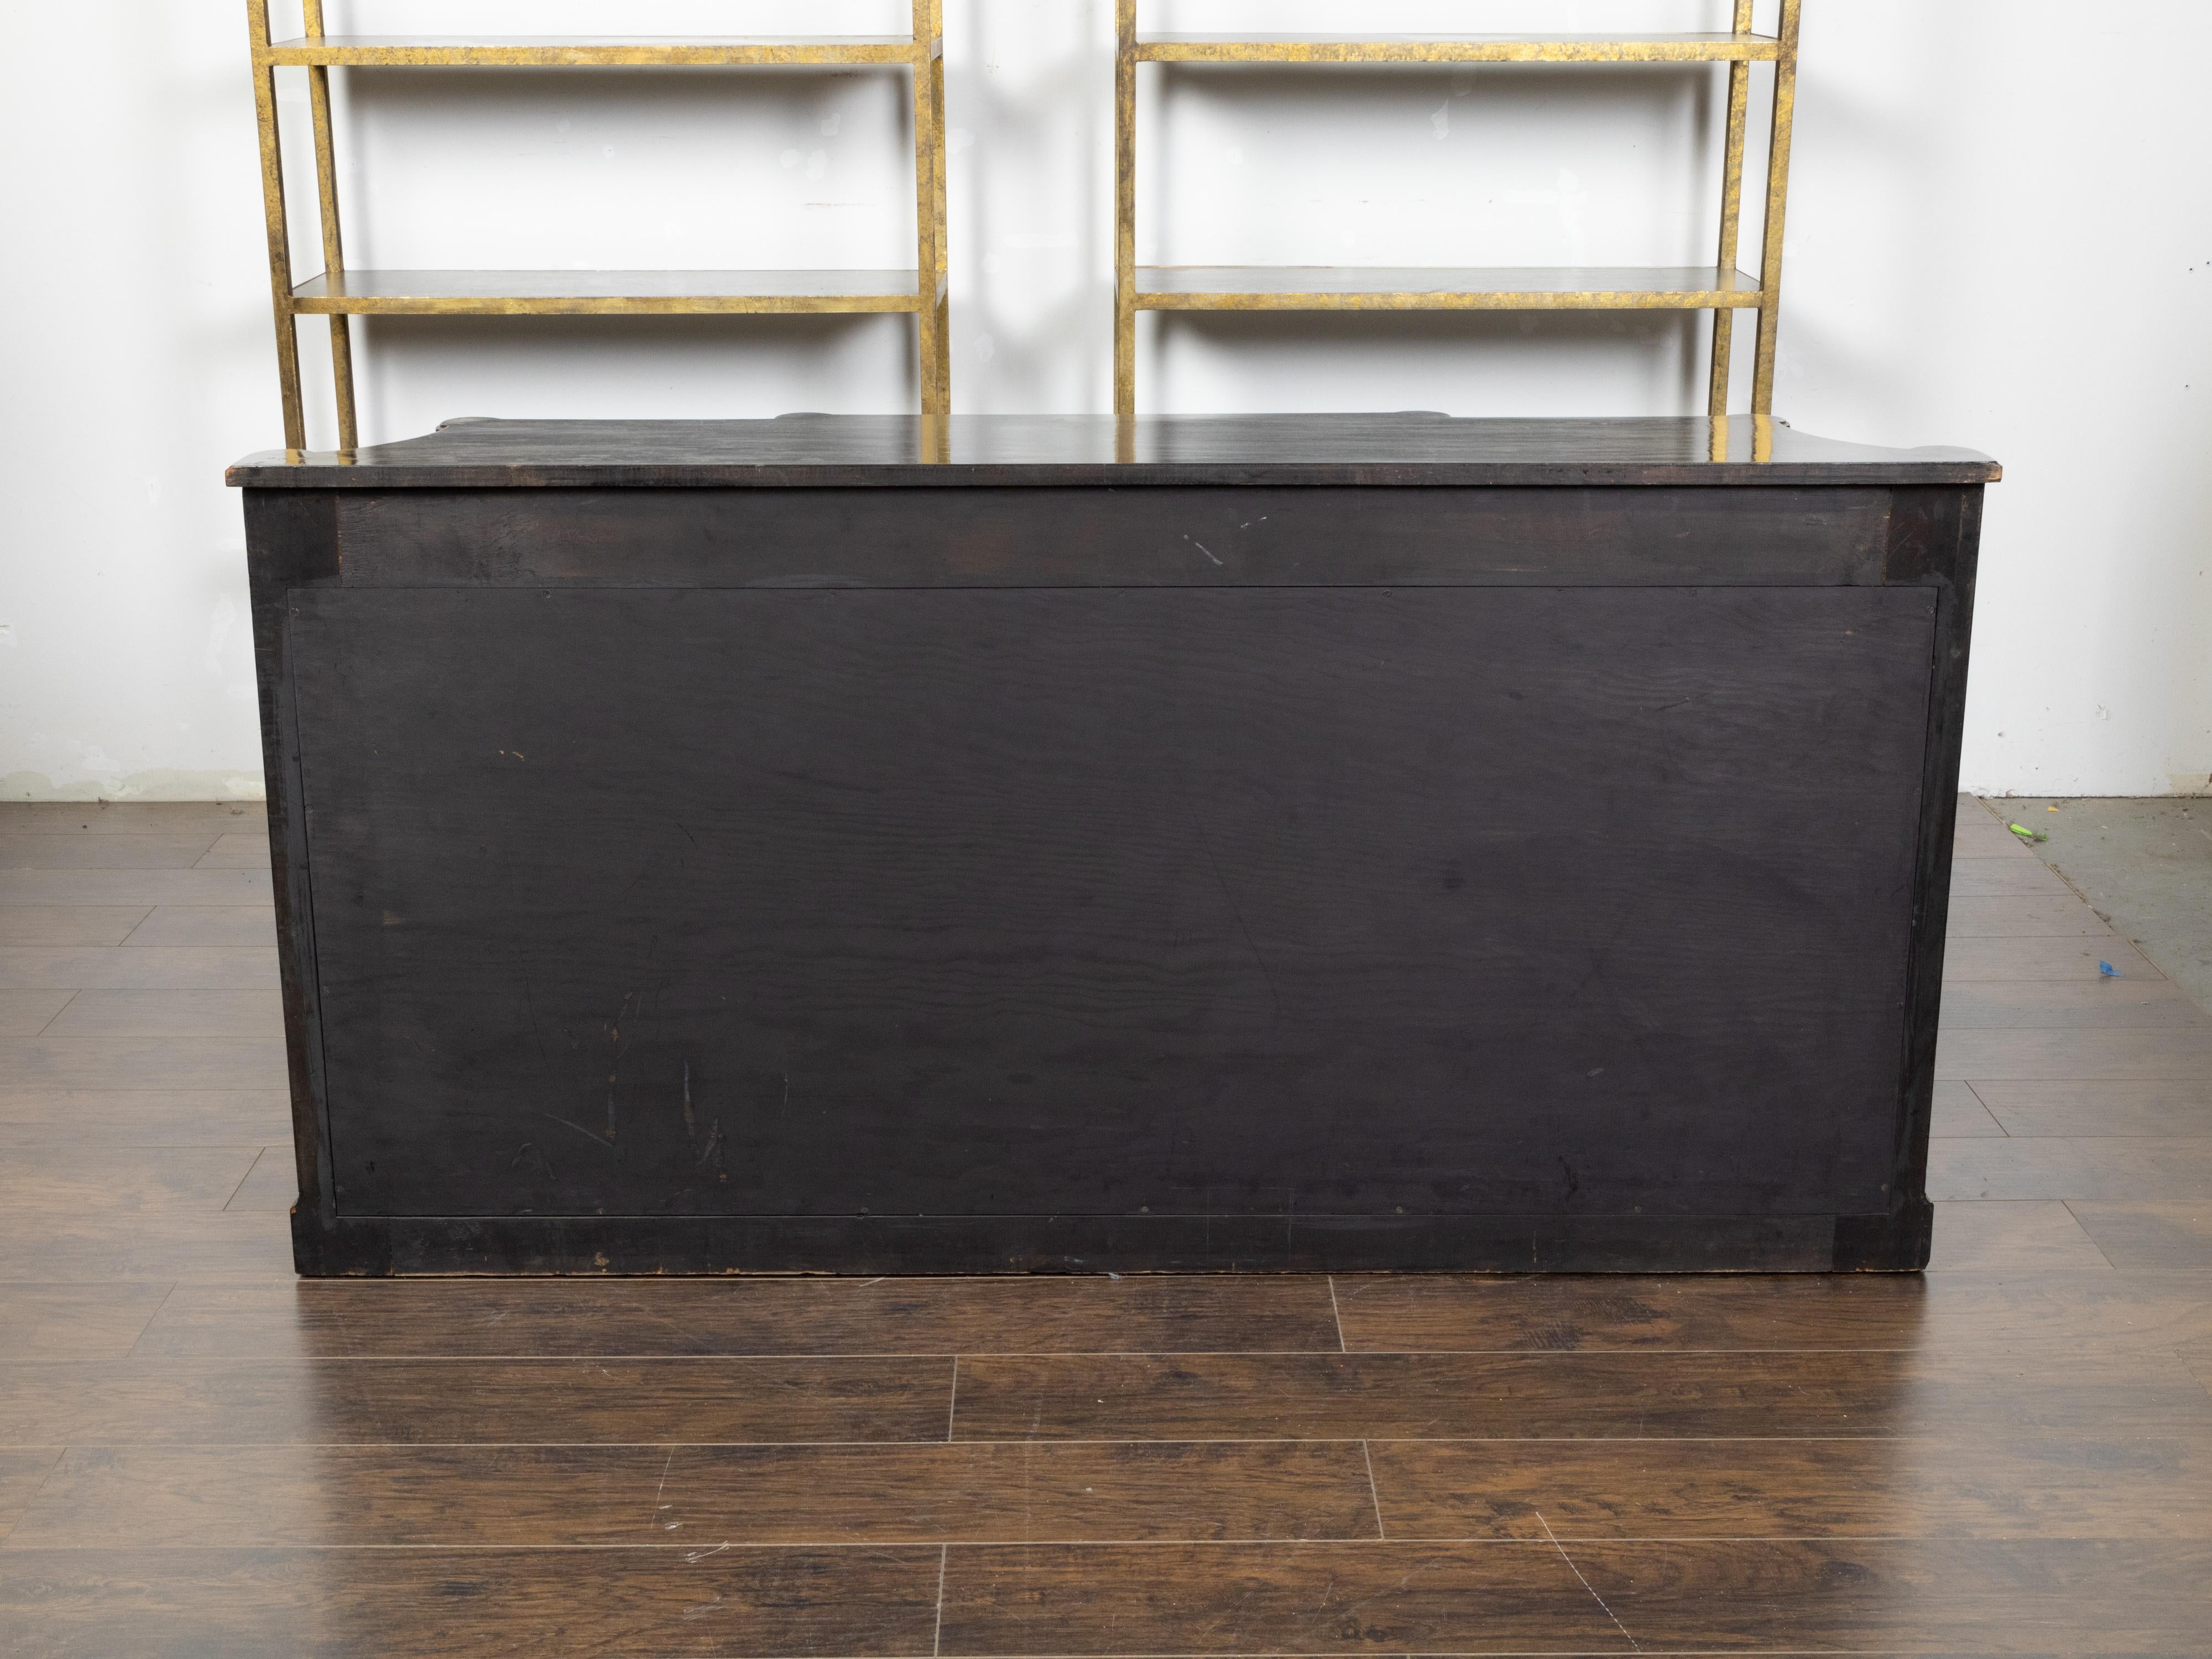 English Regency Style 1920s Gold and Black Ebonized Console Table with Mirror For Sale 2